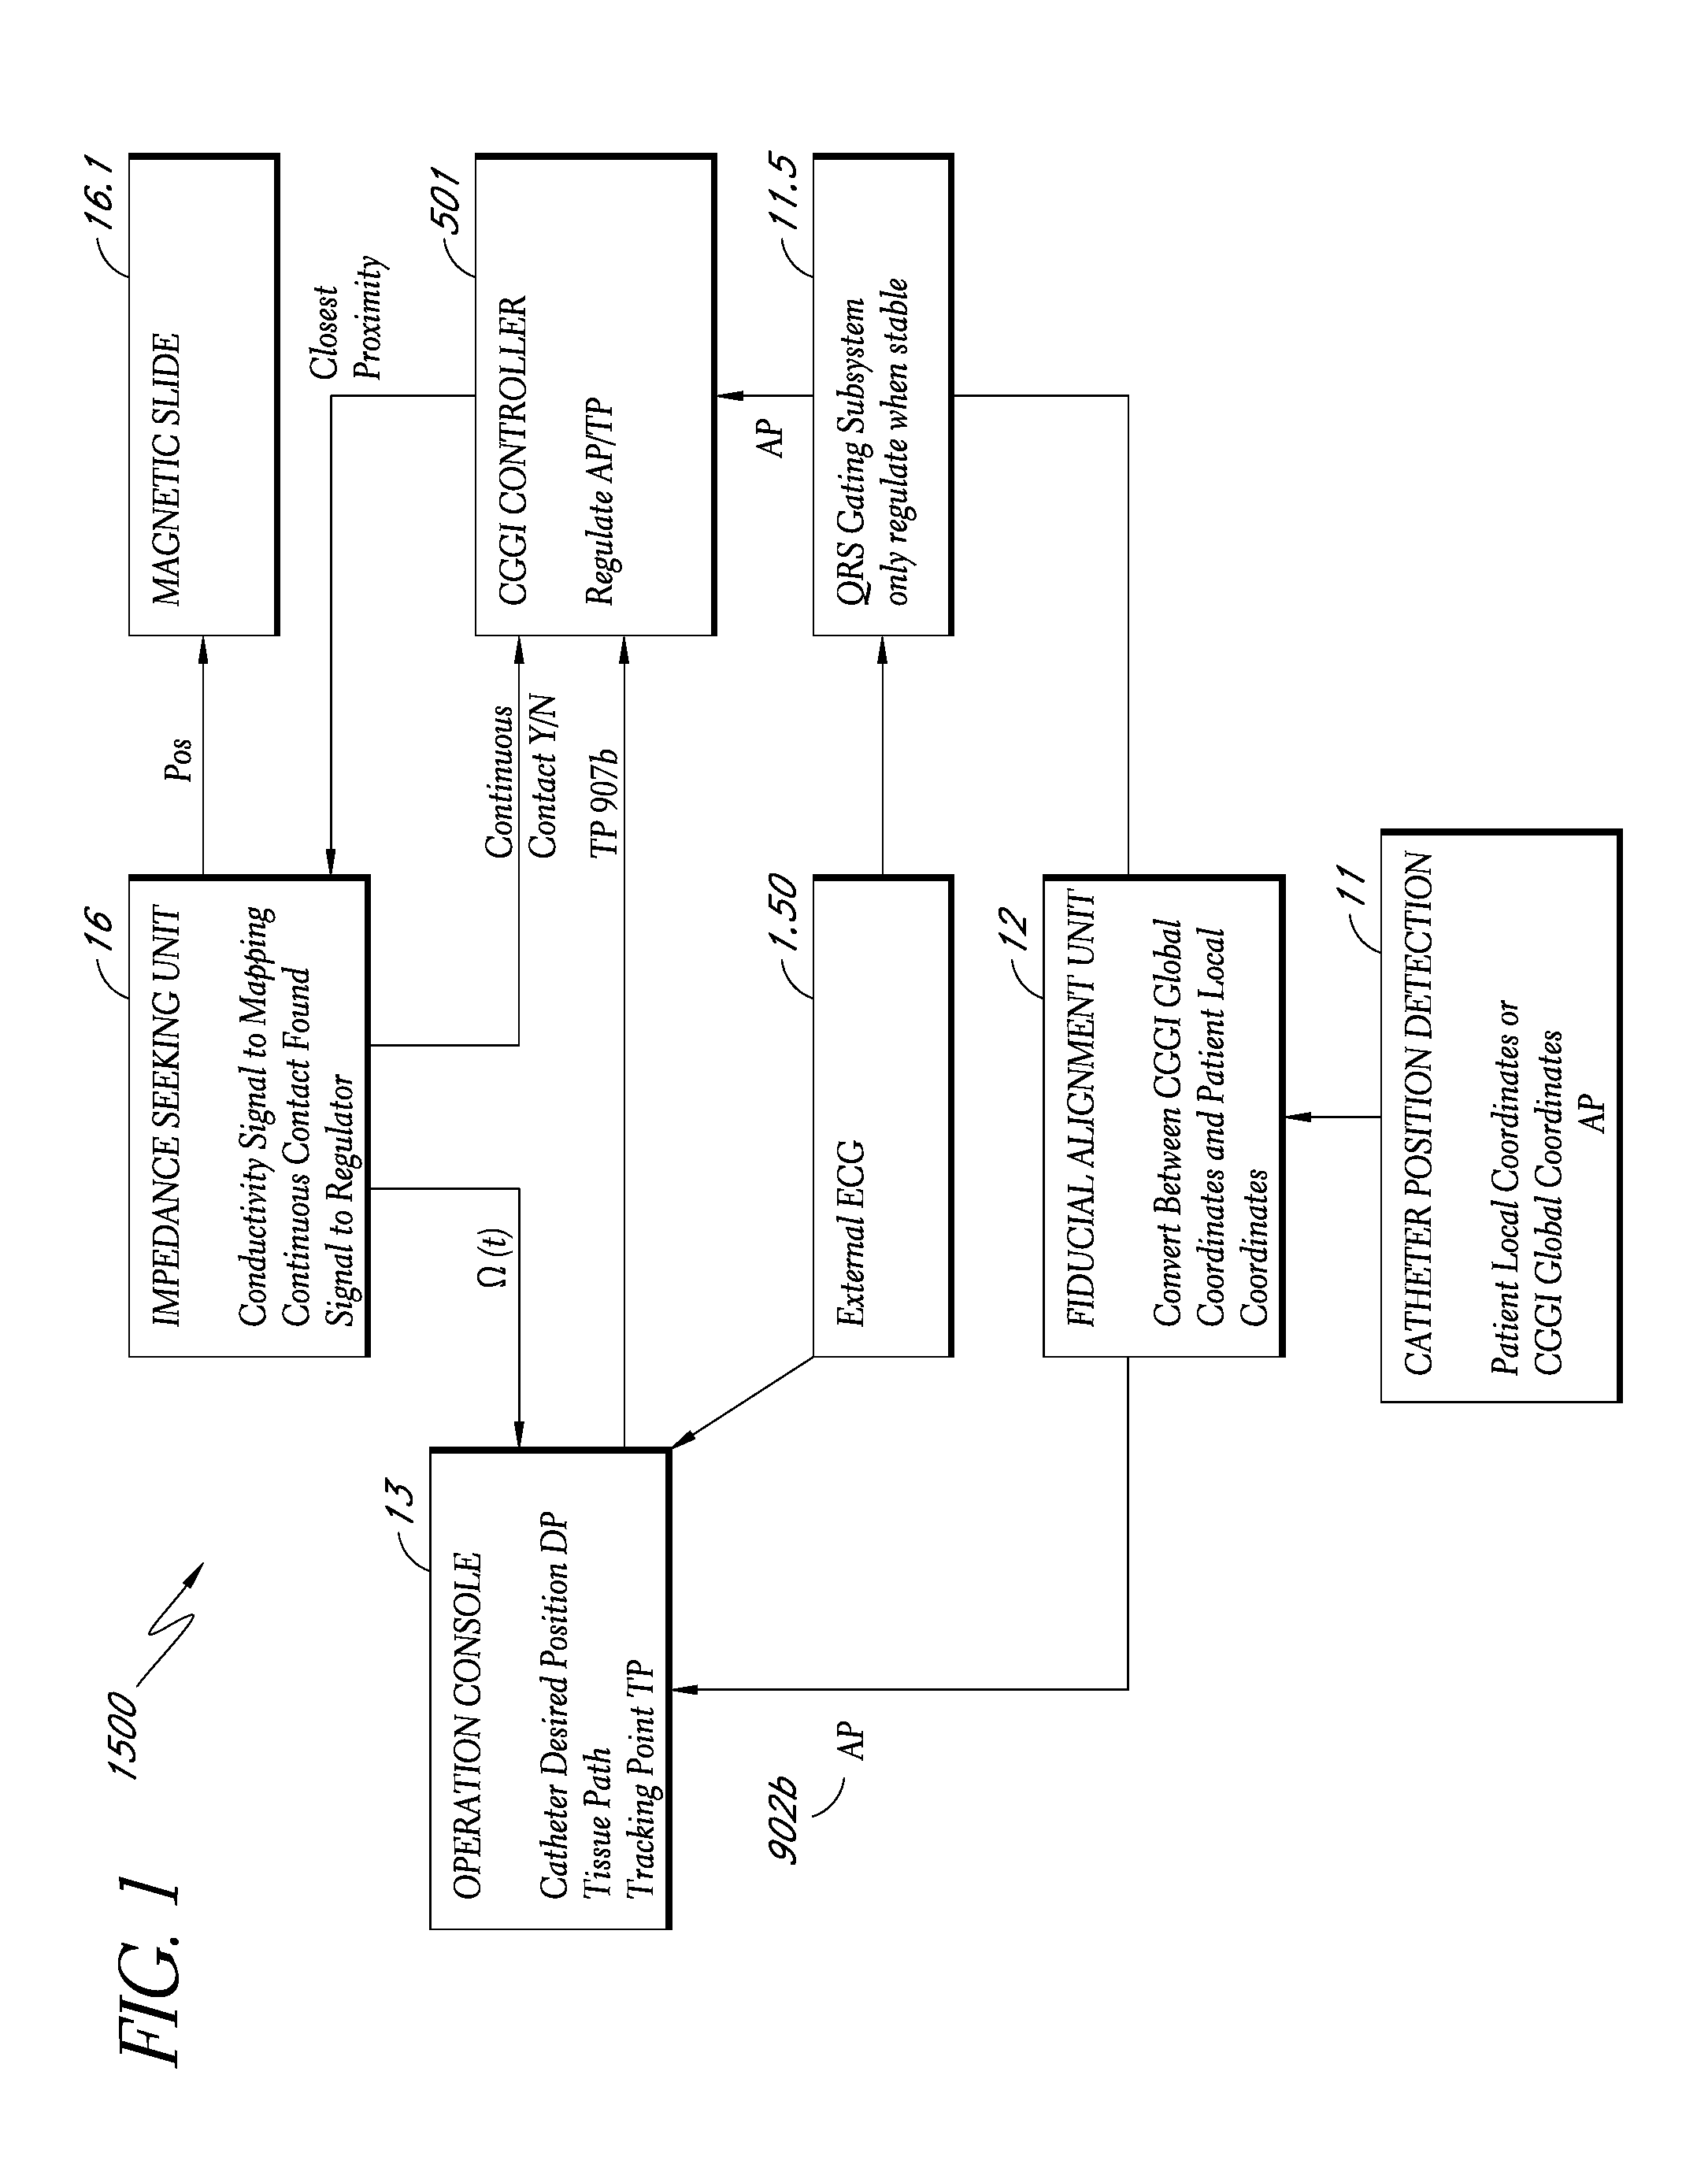 Method and apparatus for creating a high resolution map of the electrical and mechanical properties of the heart